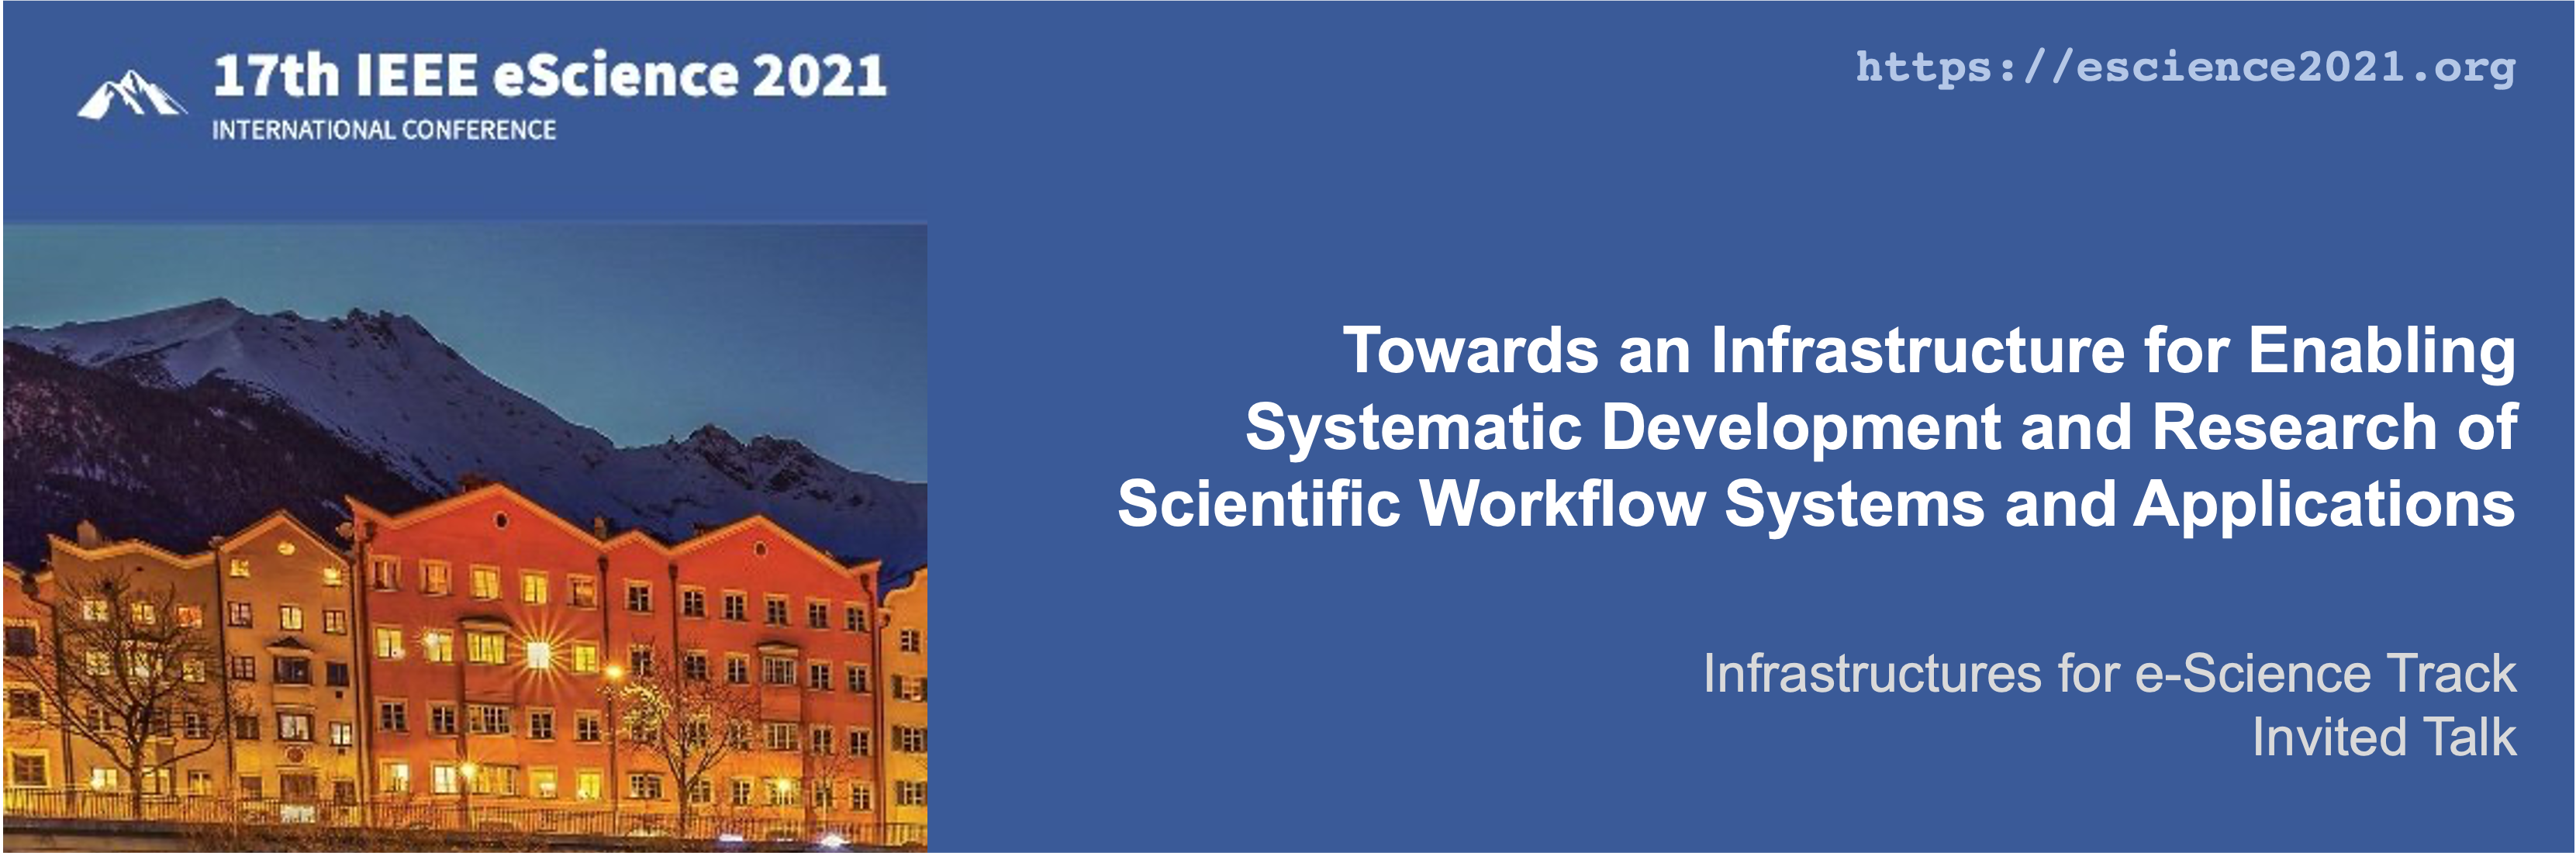 Towards an Infrastructure for Enabling Systematic Development and Research of Scientific Workflow Systems and Applications